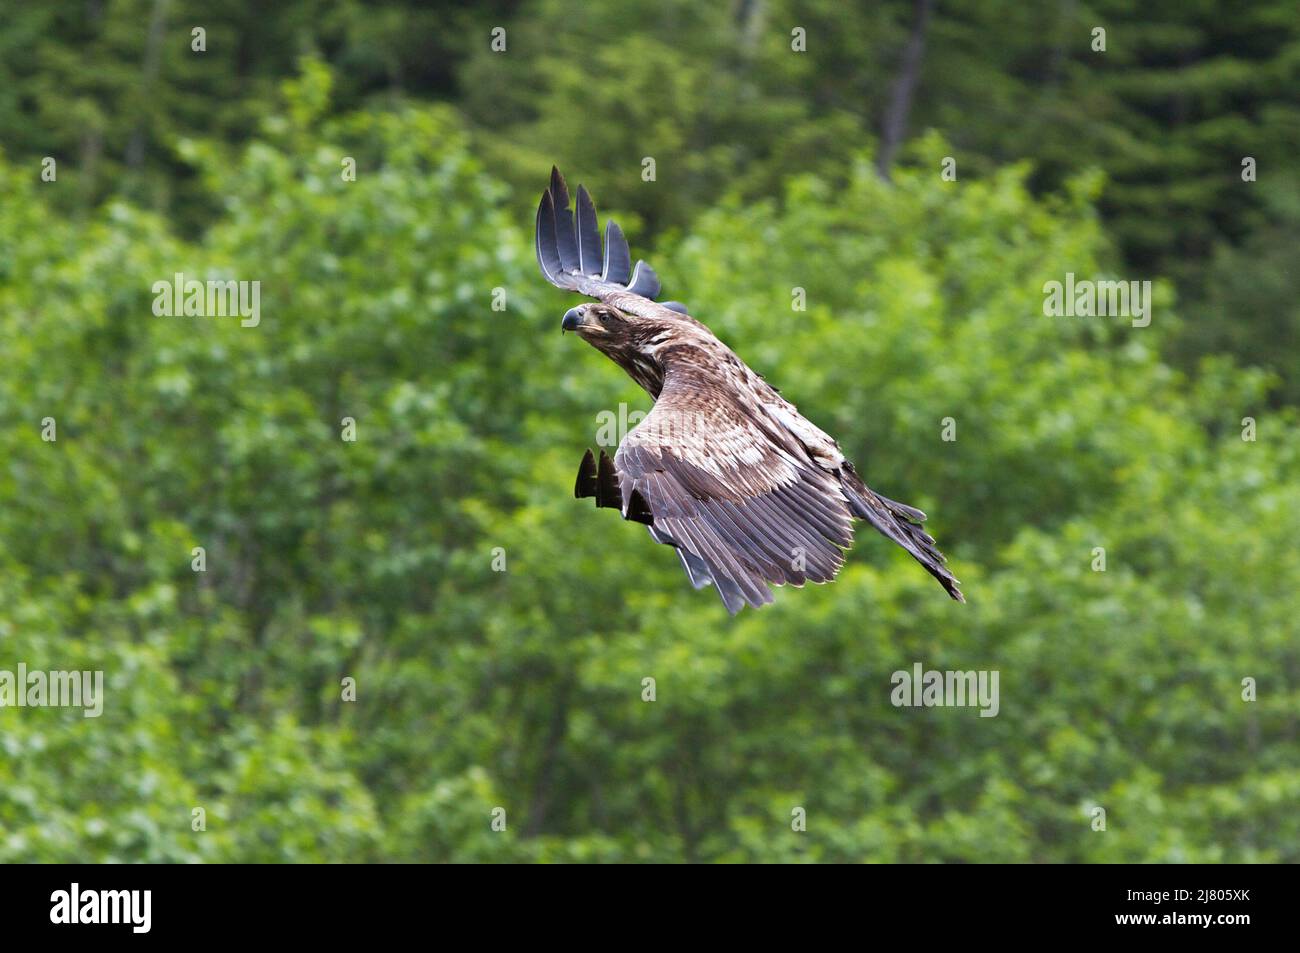 A young Bald Eagle (Haliaeetus leucocephalus) in flight against the bright green foliage of an Alaskan forest. Stock Photo